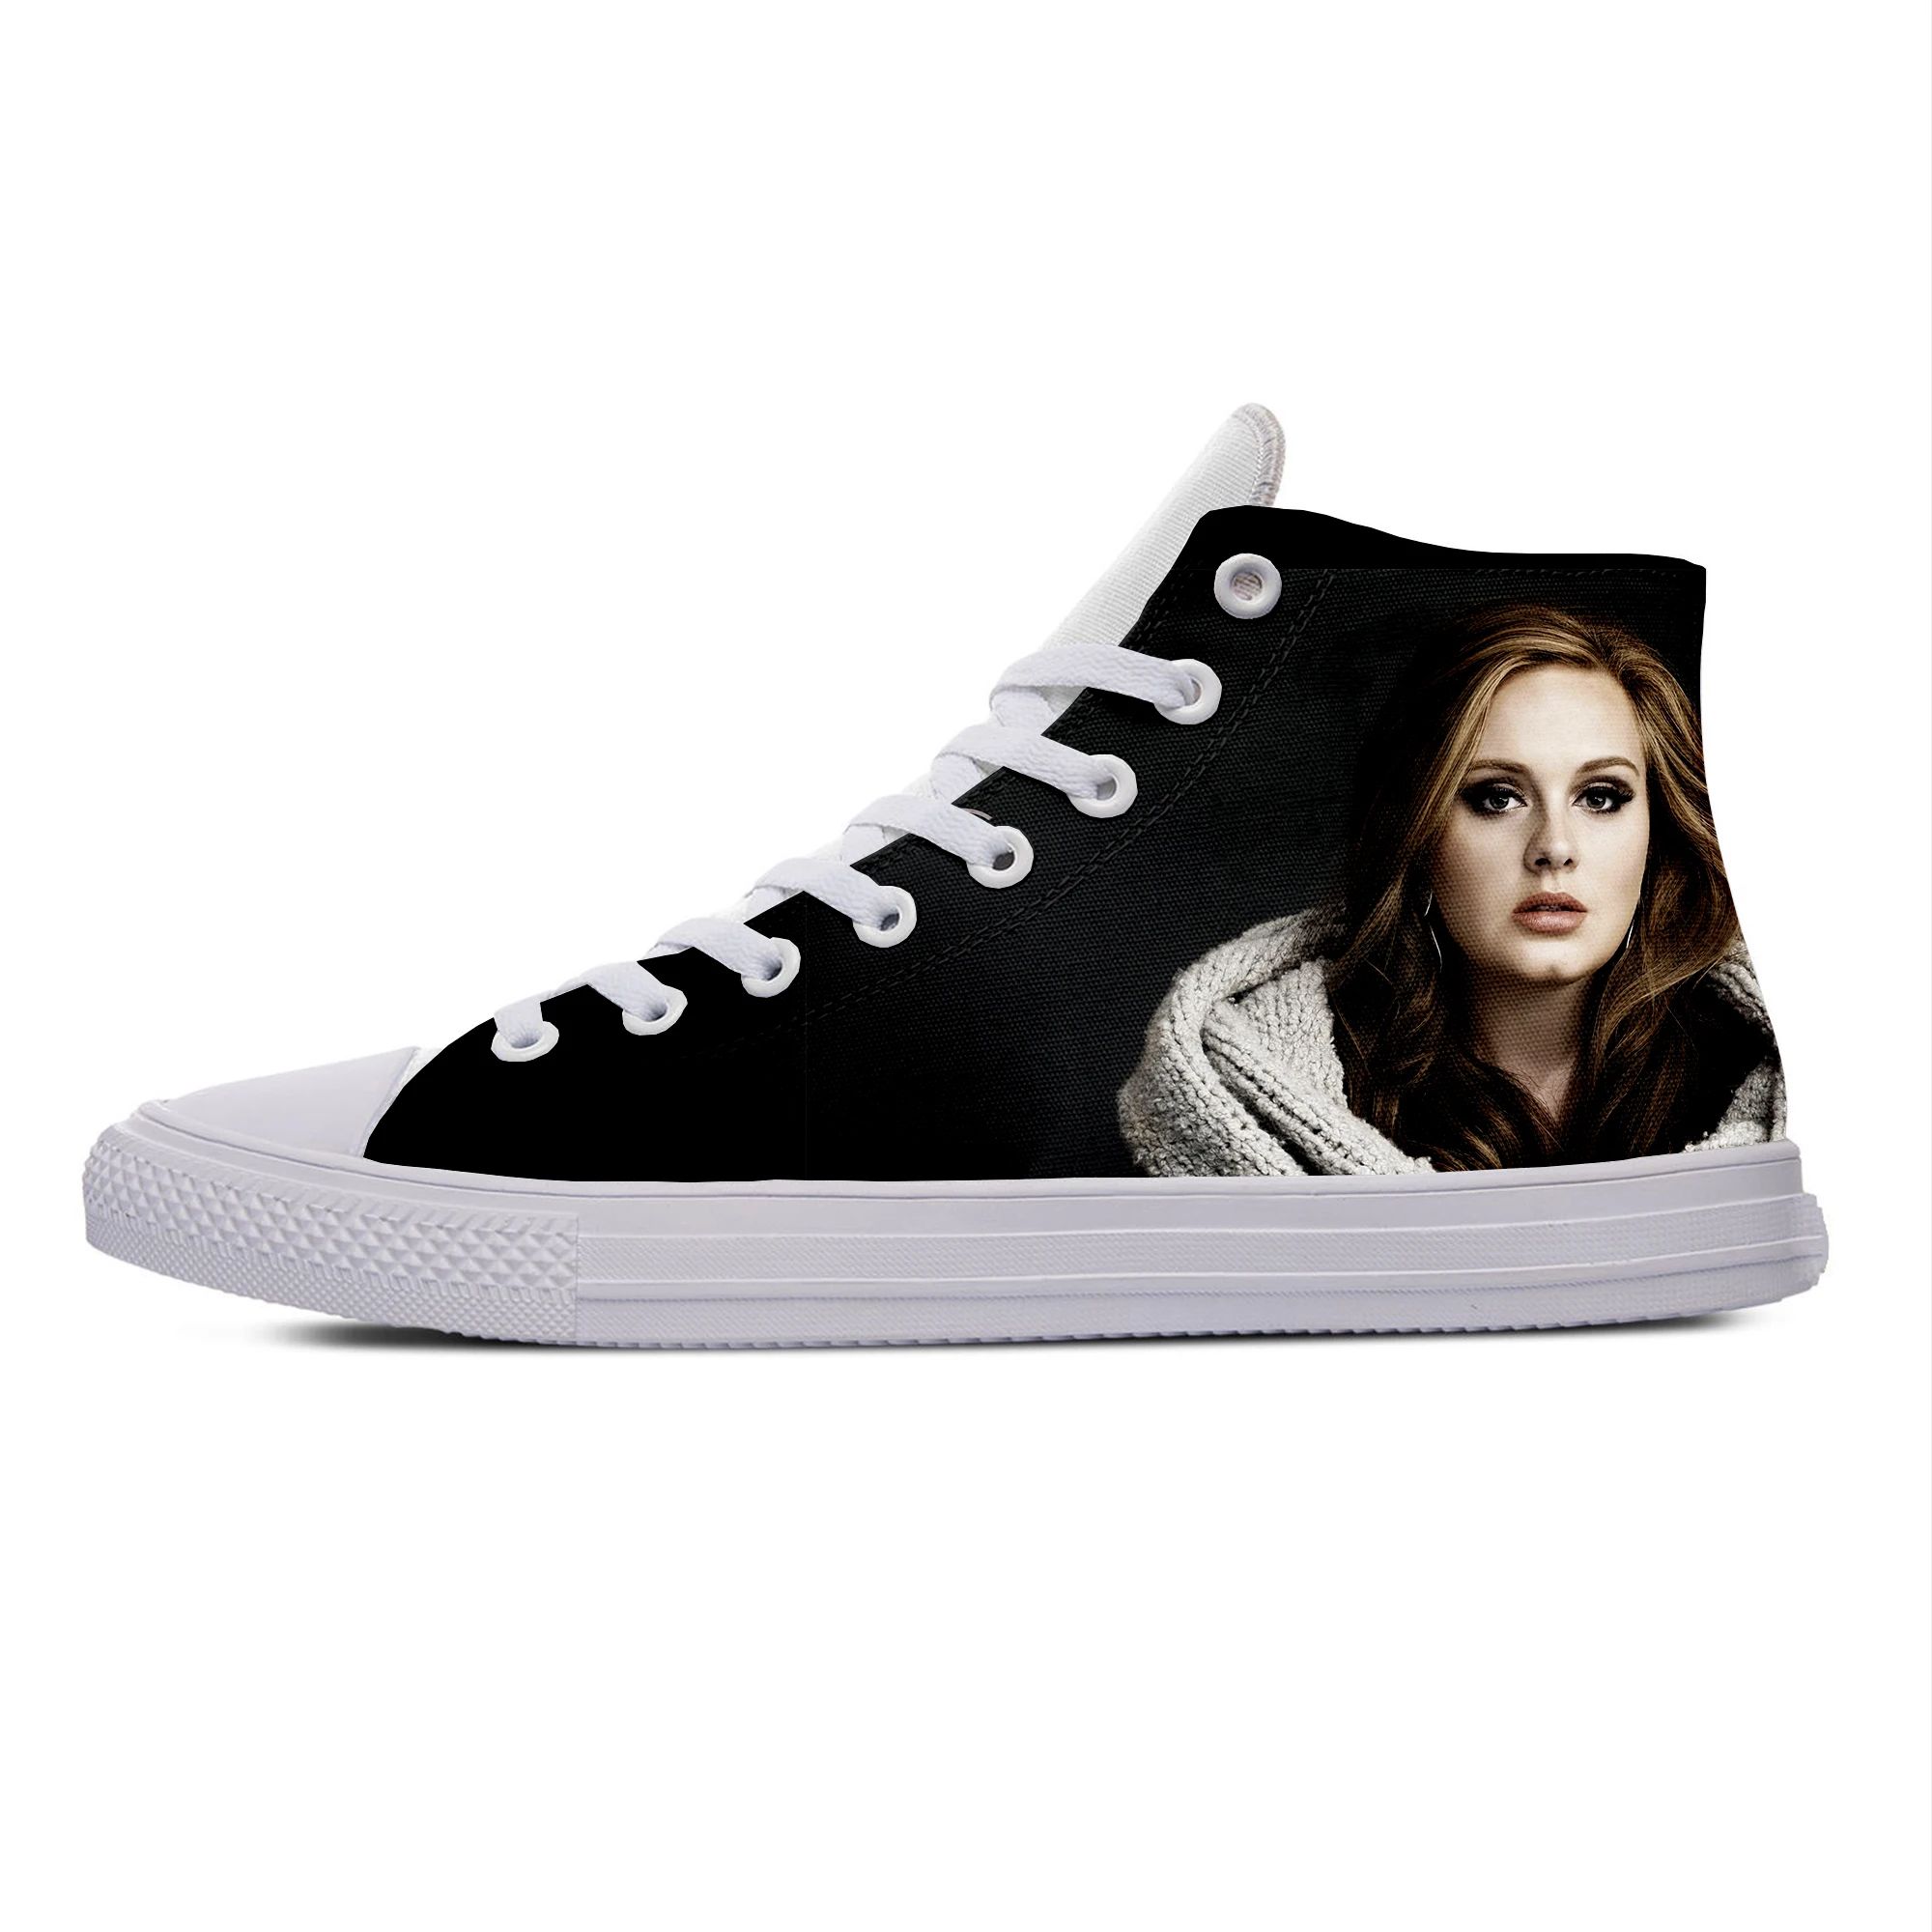 Couleur: Adele 1Shoe Taille: 11